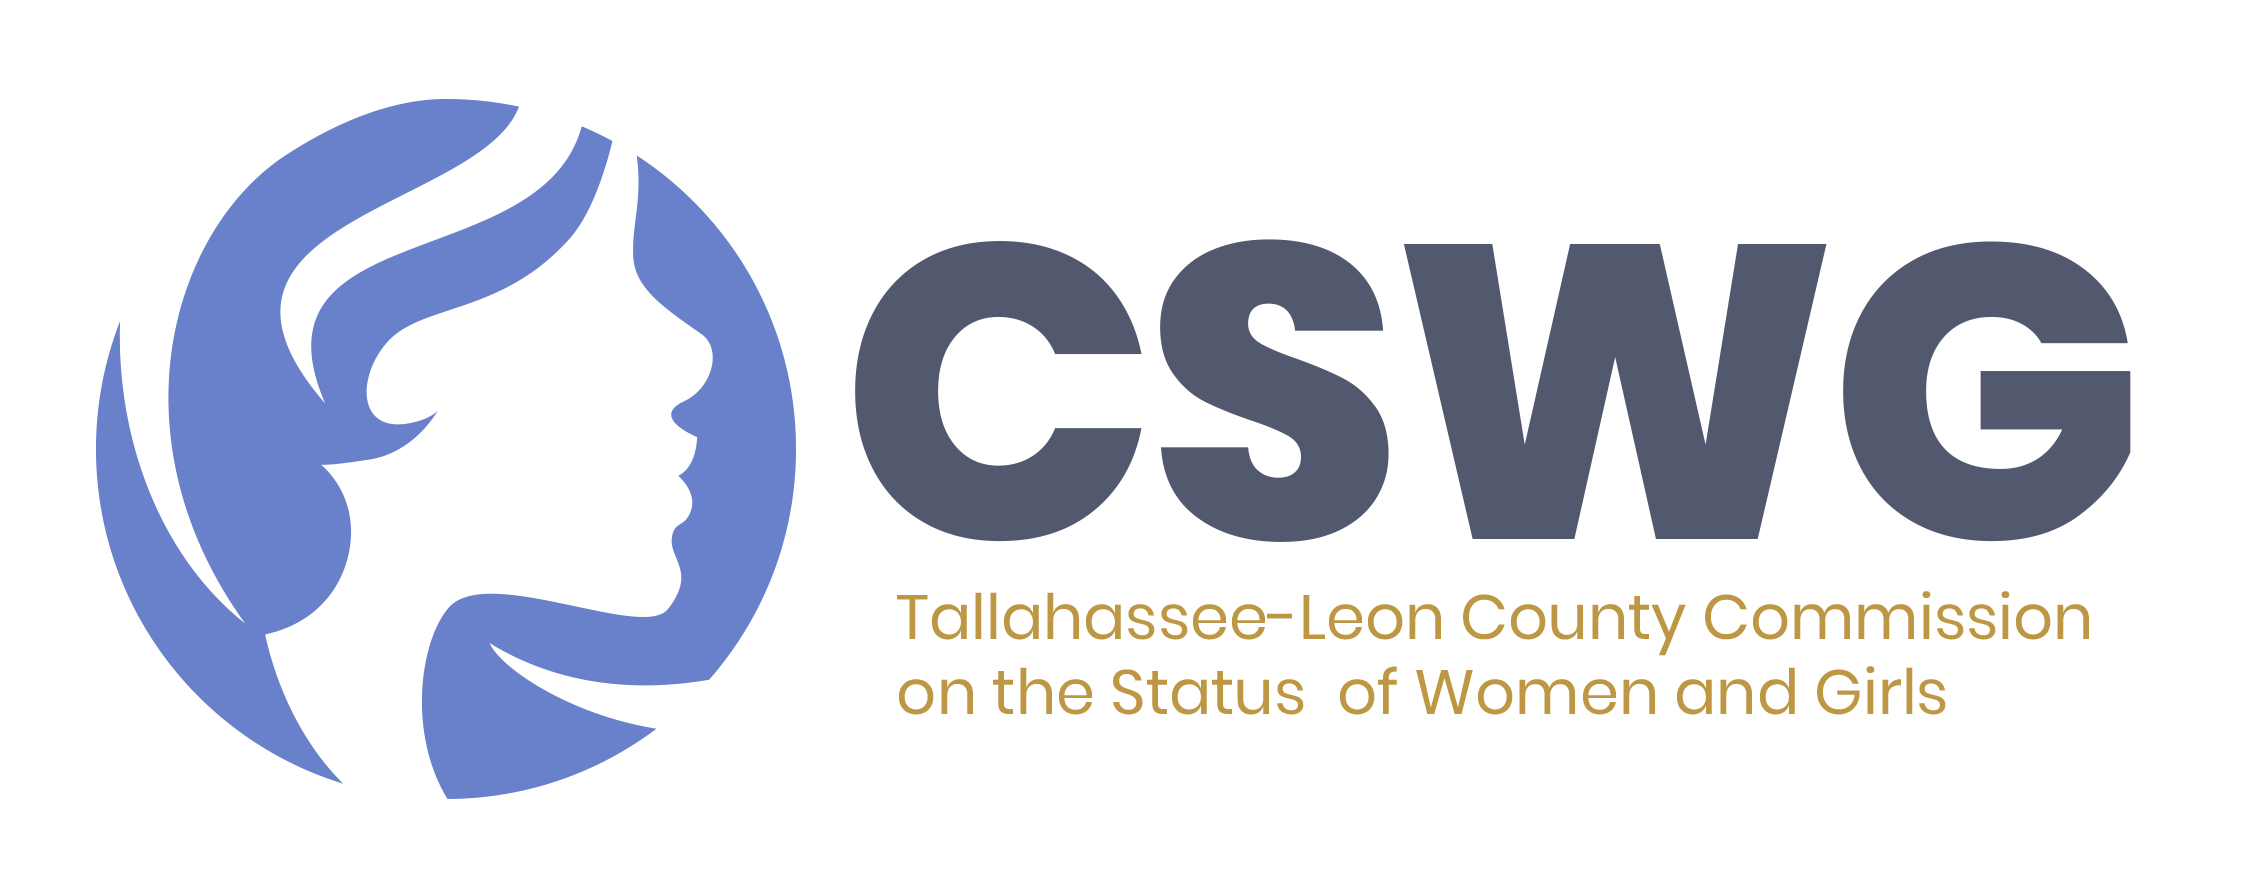 Tallahassee-Leon County Commission on the Status of Women and Girls